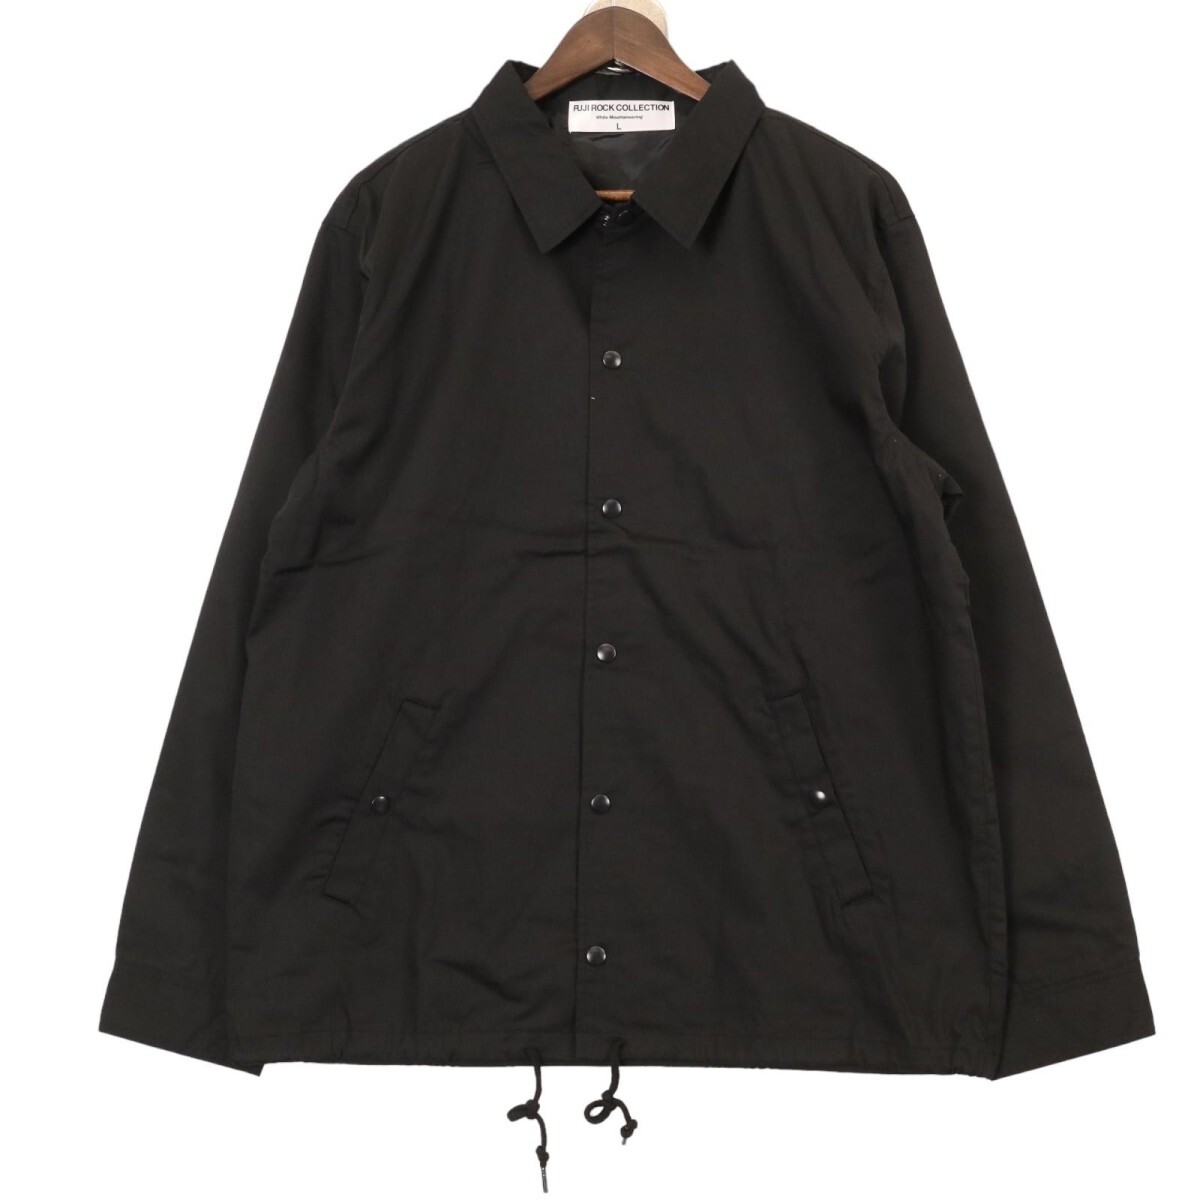 White Mountaineering × FUJI ROCK COLLECTION / coach jacket ホワイトマウンテニアリング フジロック 2019年 コーチジャケット_画像1